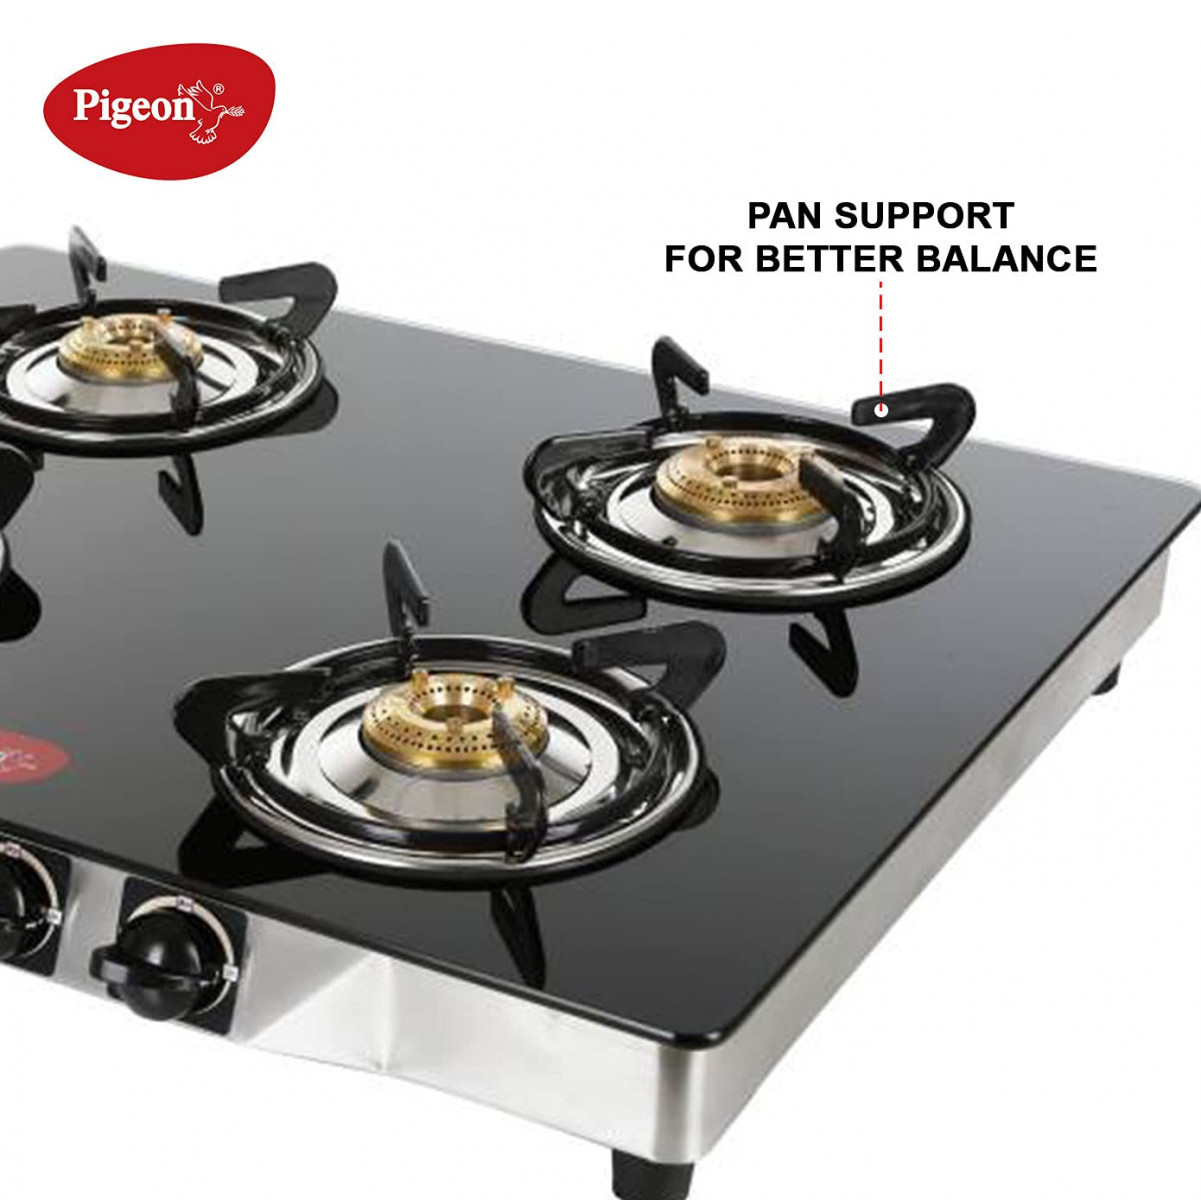 Pigeon by Stovekraft Blaze Gas Stove with High Powered 4 Brass Burner Glass Cooktop has Glass Top